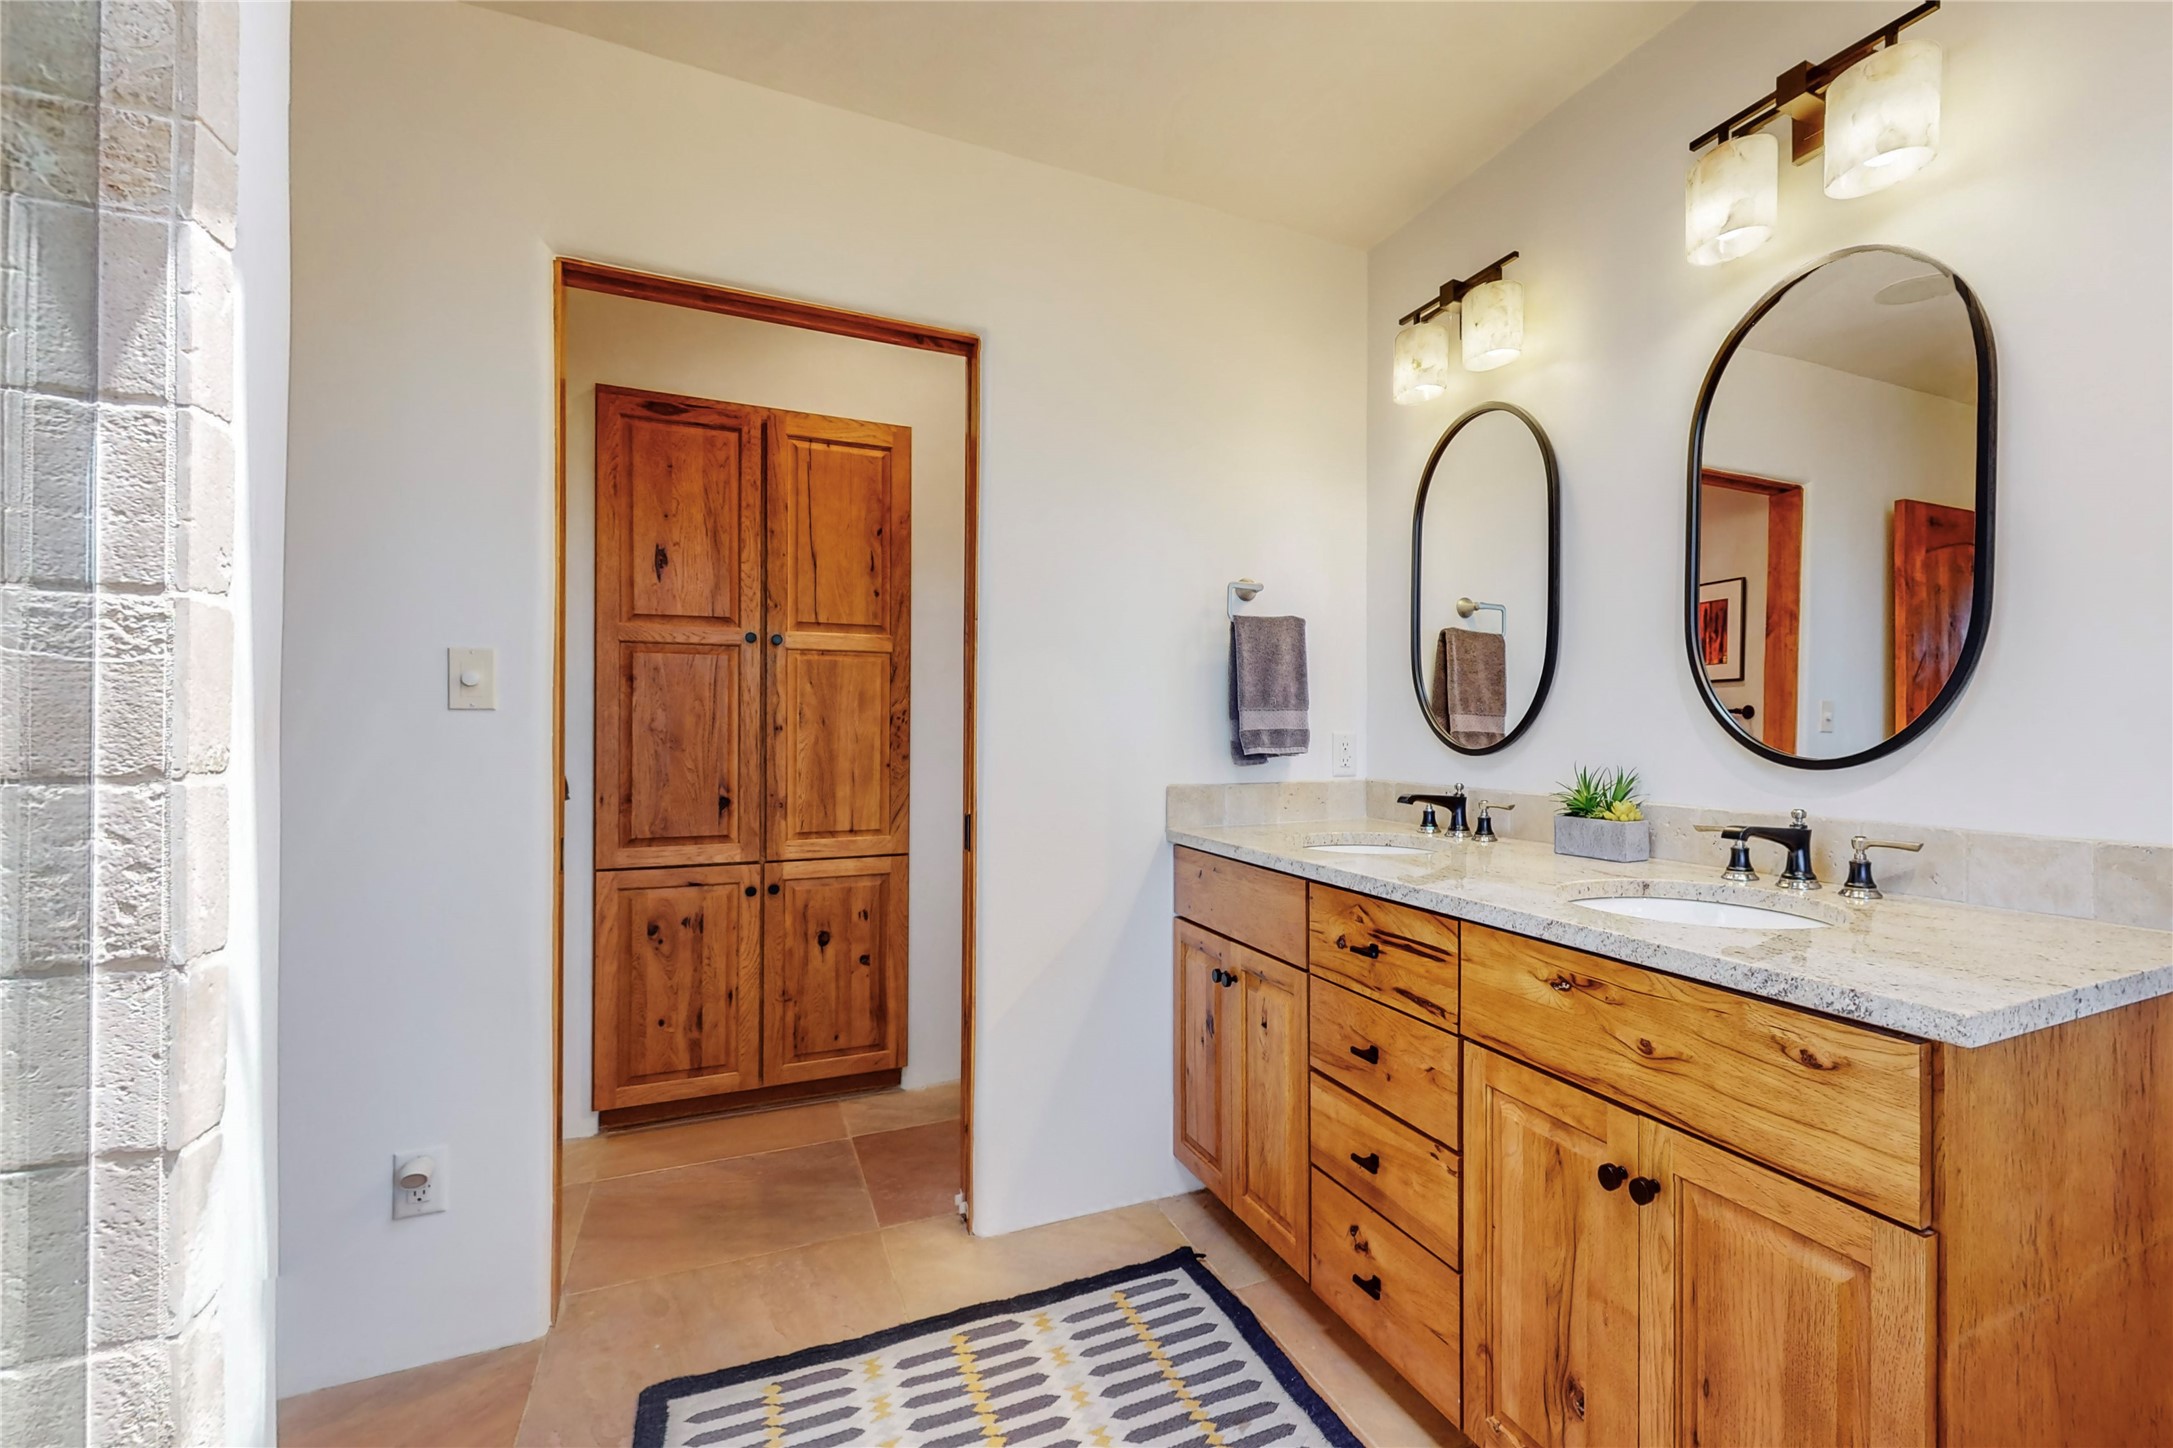 The bathroom in the primary suite, gracious and large, with bonus/linen closet